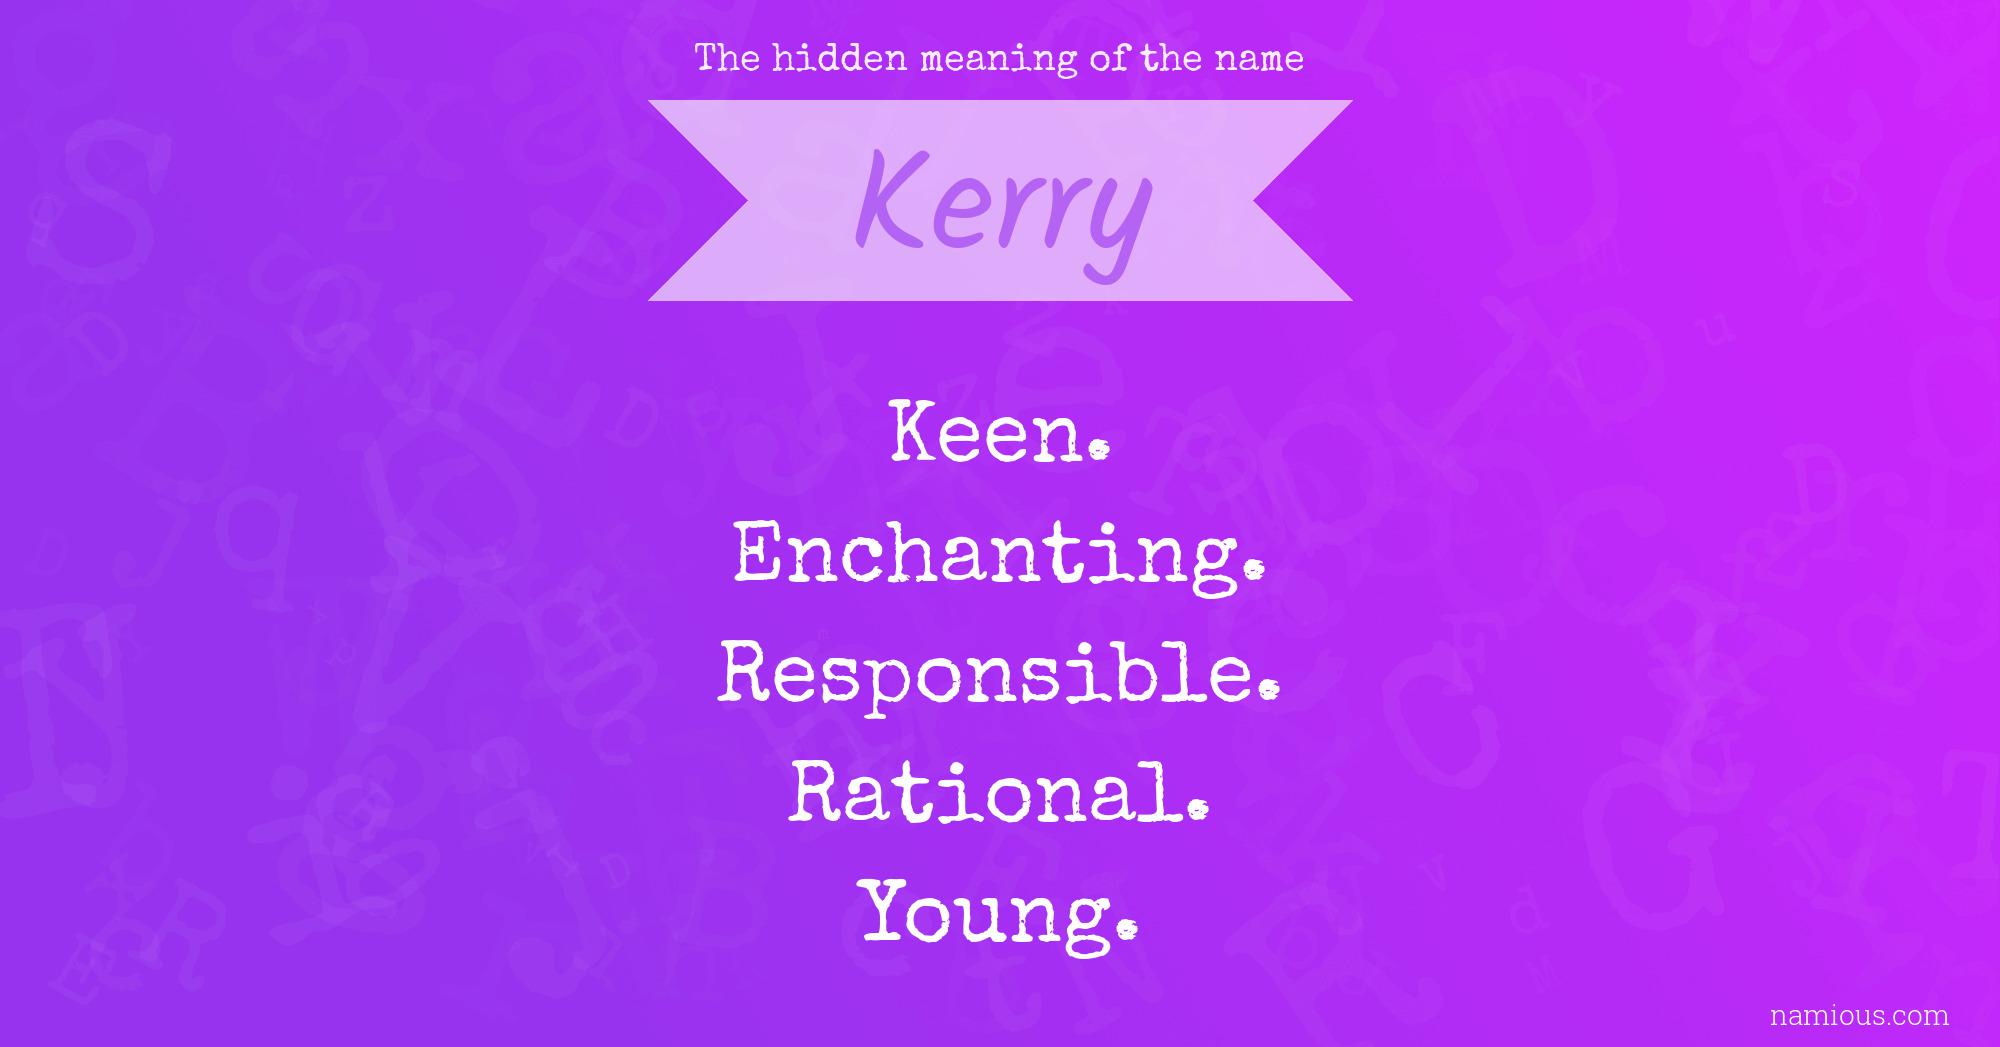 The hidden meaning of the name Kerry